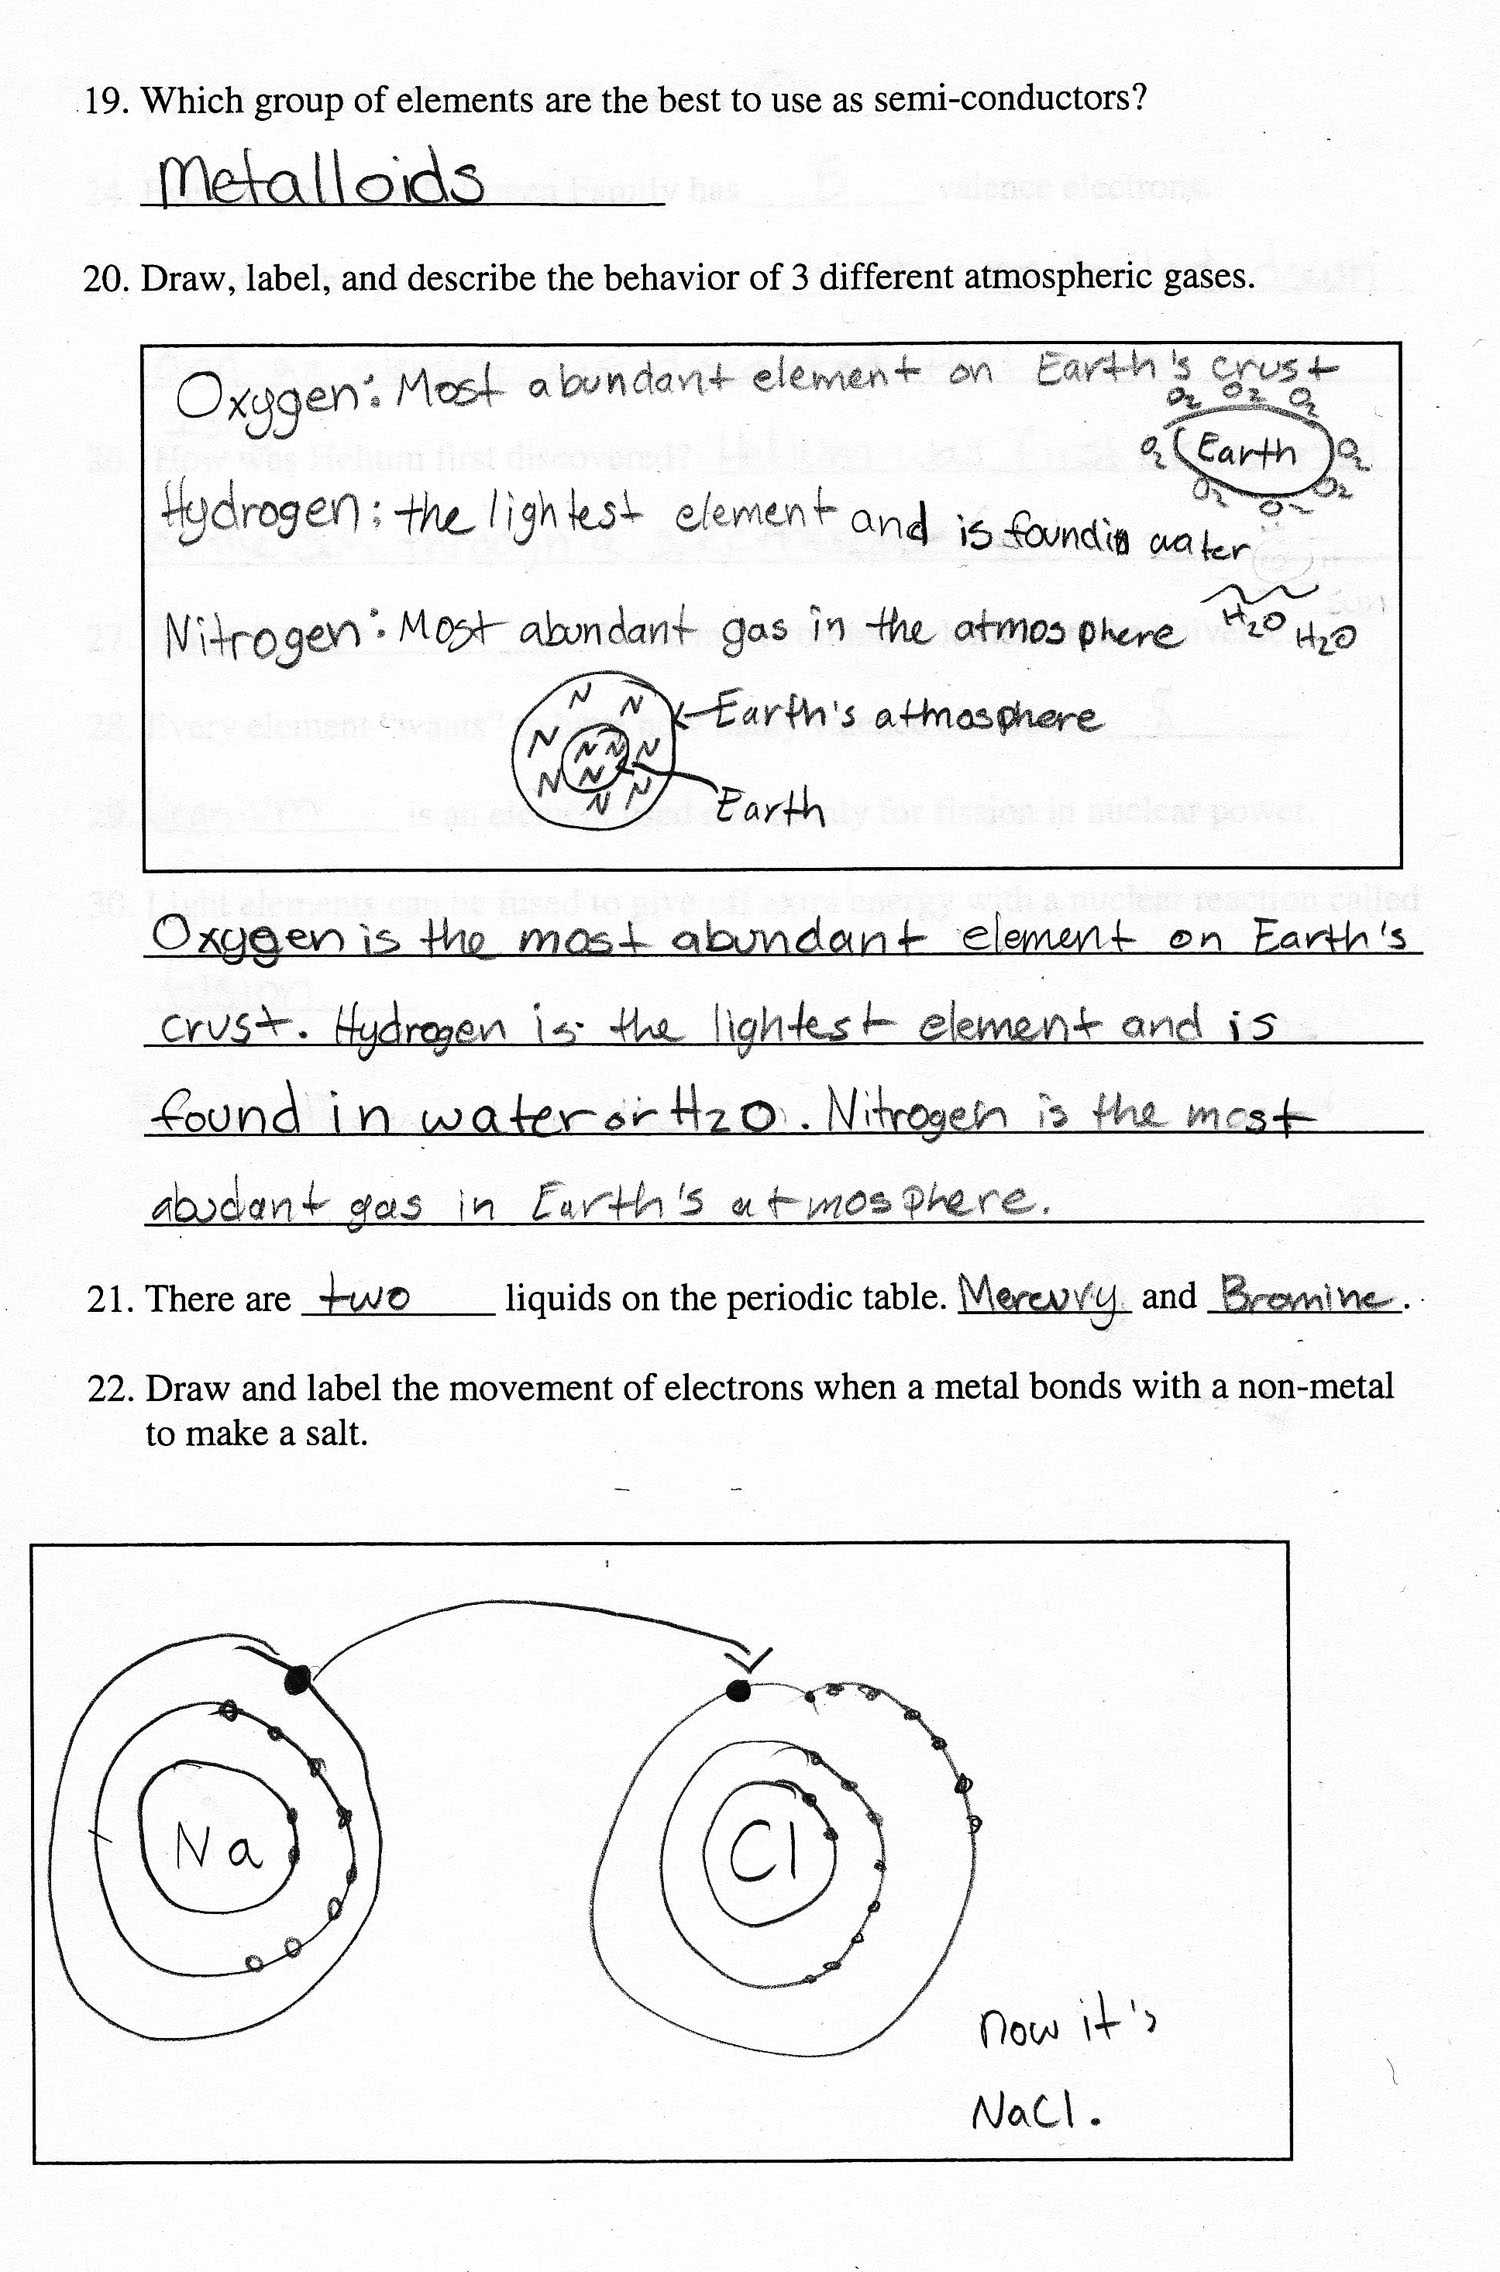 Bill Nye atmosphere Worksheet Answers together with Homework 10 Pts Pp Bonds Lab 20 Pts